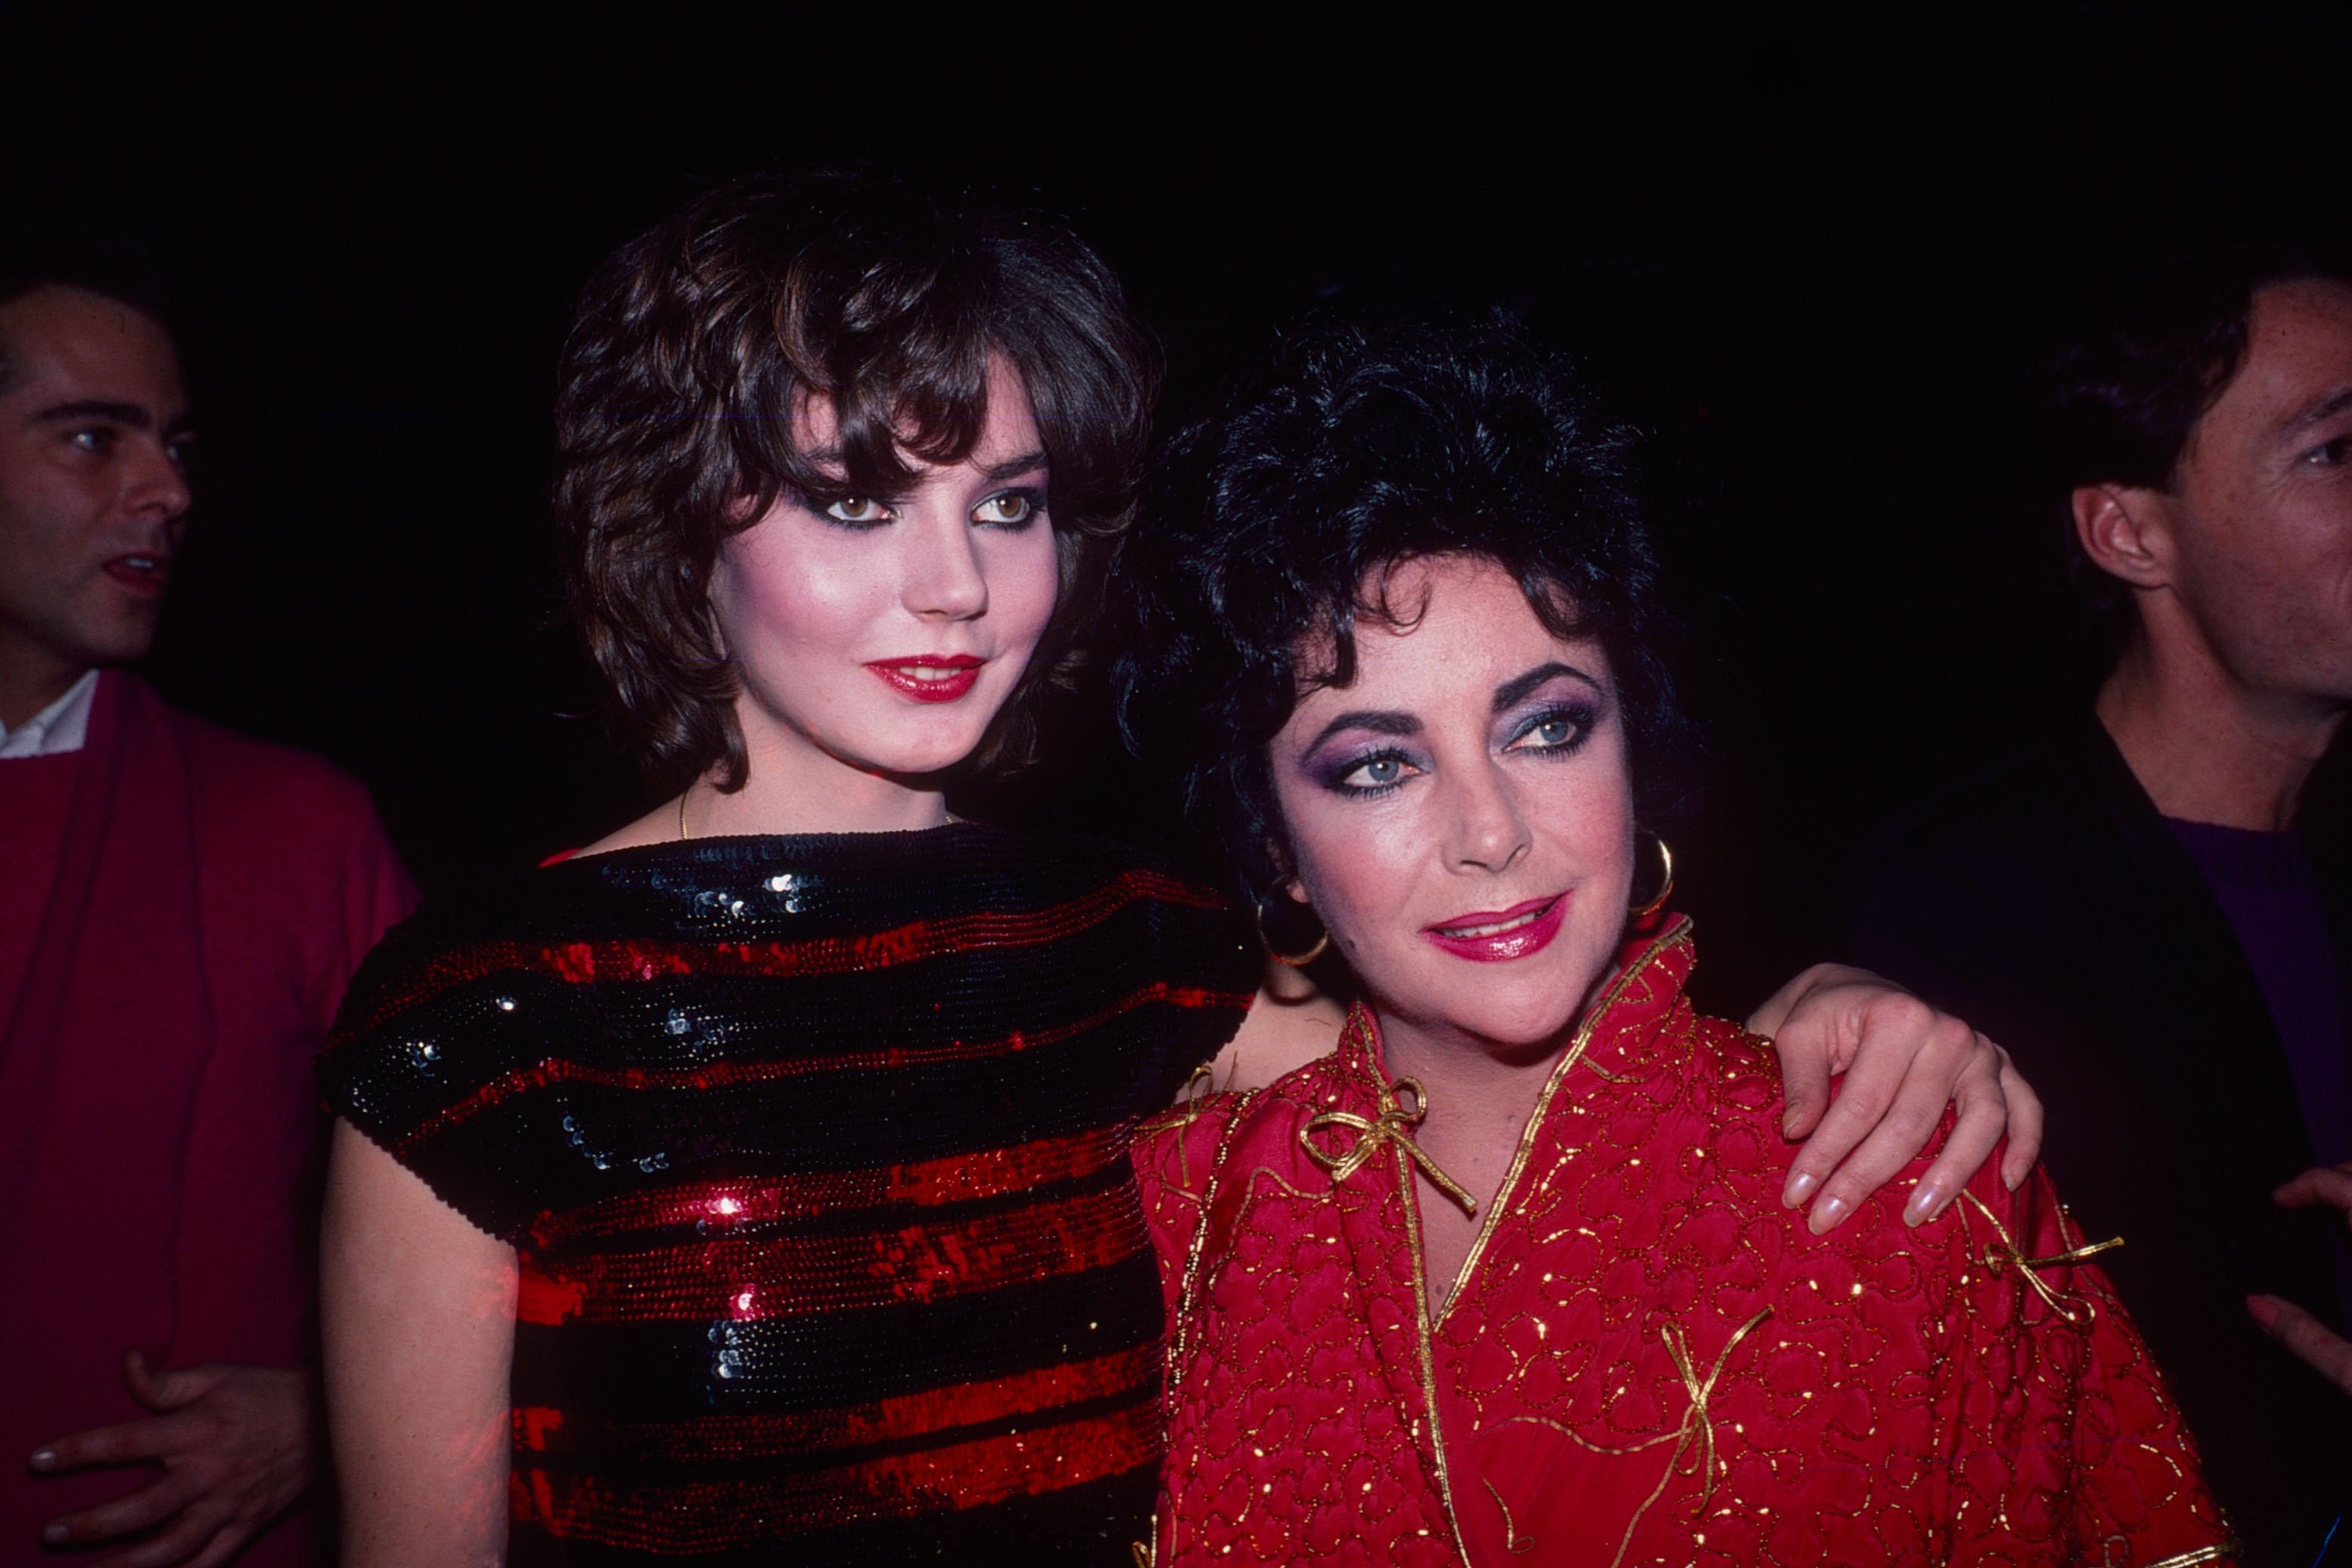 Maria Burton and her mother Elizabeth Taylor attend an event at the Roxy Roller Rink in November 1980 in New York. | Source: Getty Images